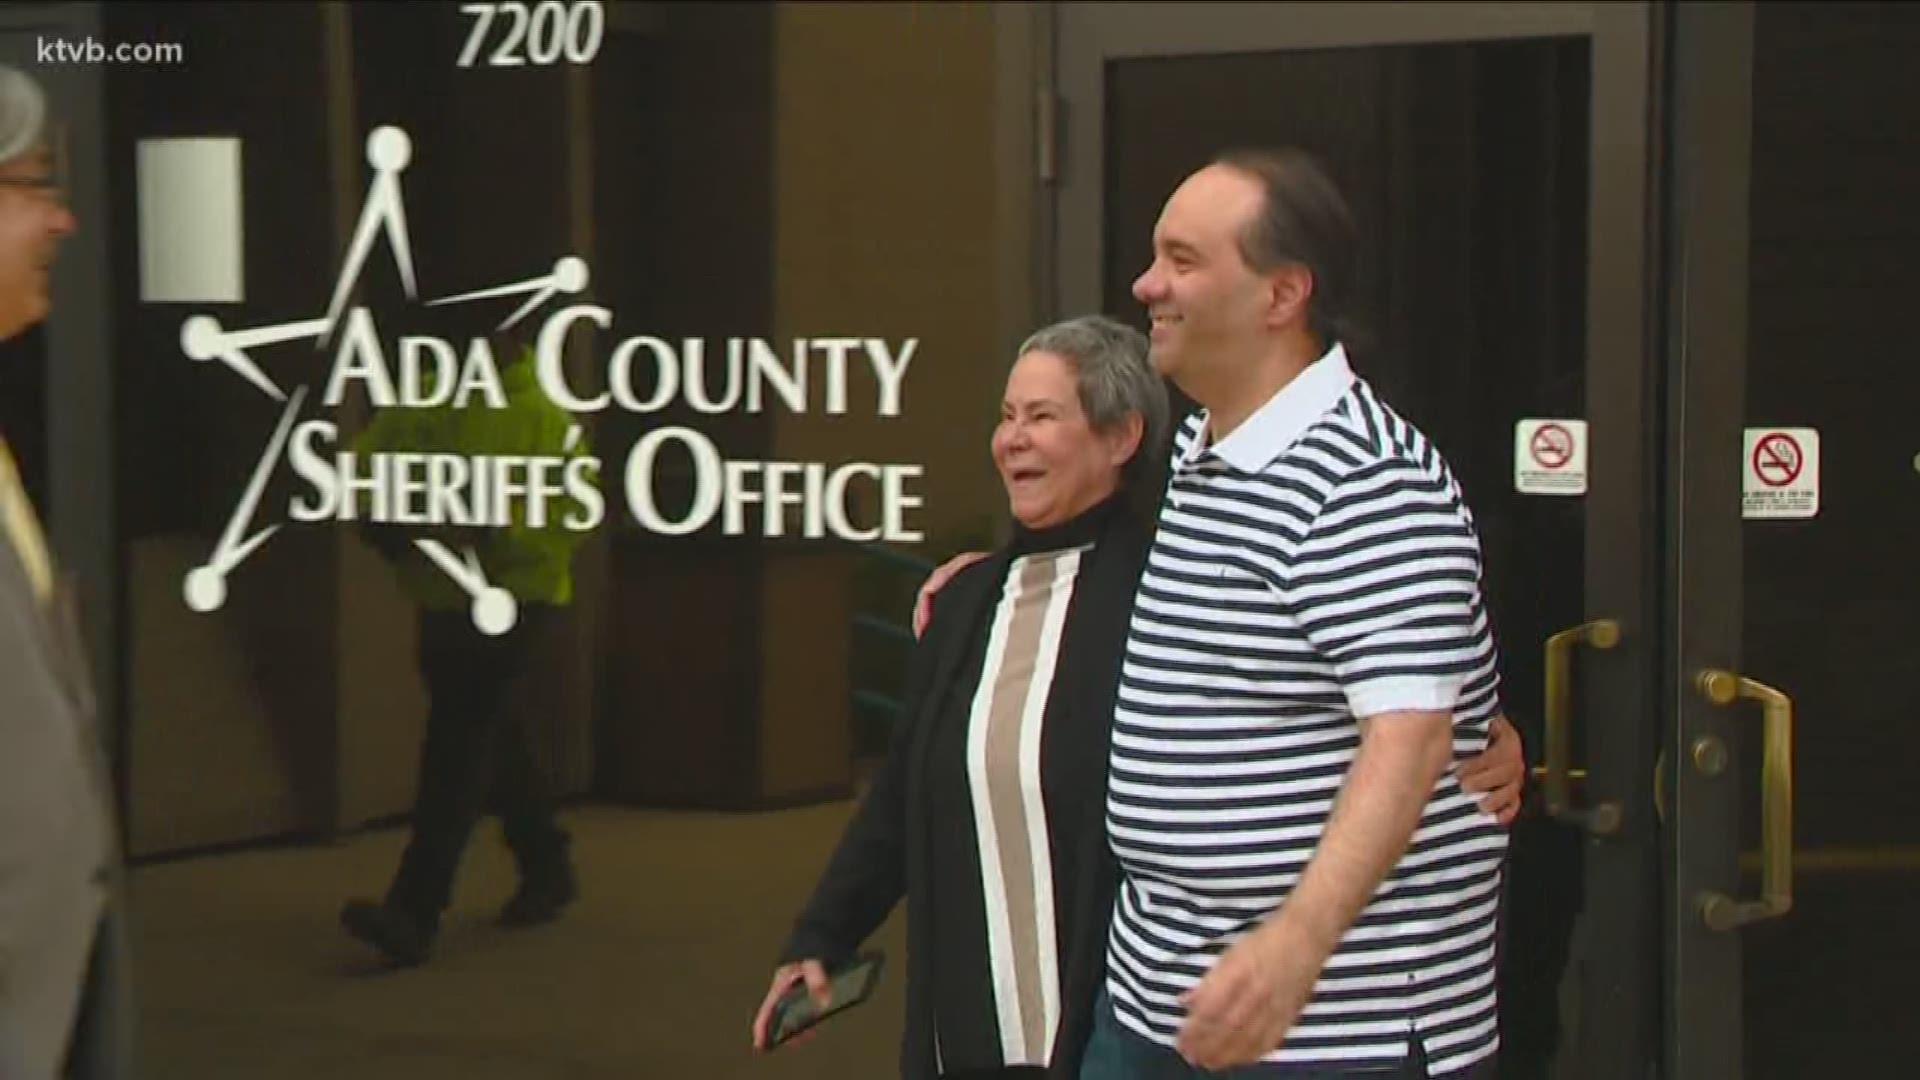 In February, a federal court judge ordered the state of Idaho to release or re-try Edward Stevens, a man convicted of murder more than two decades ago. On Monday, Stevens walked out of the Ada County Jail with his mother and his lawyer.